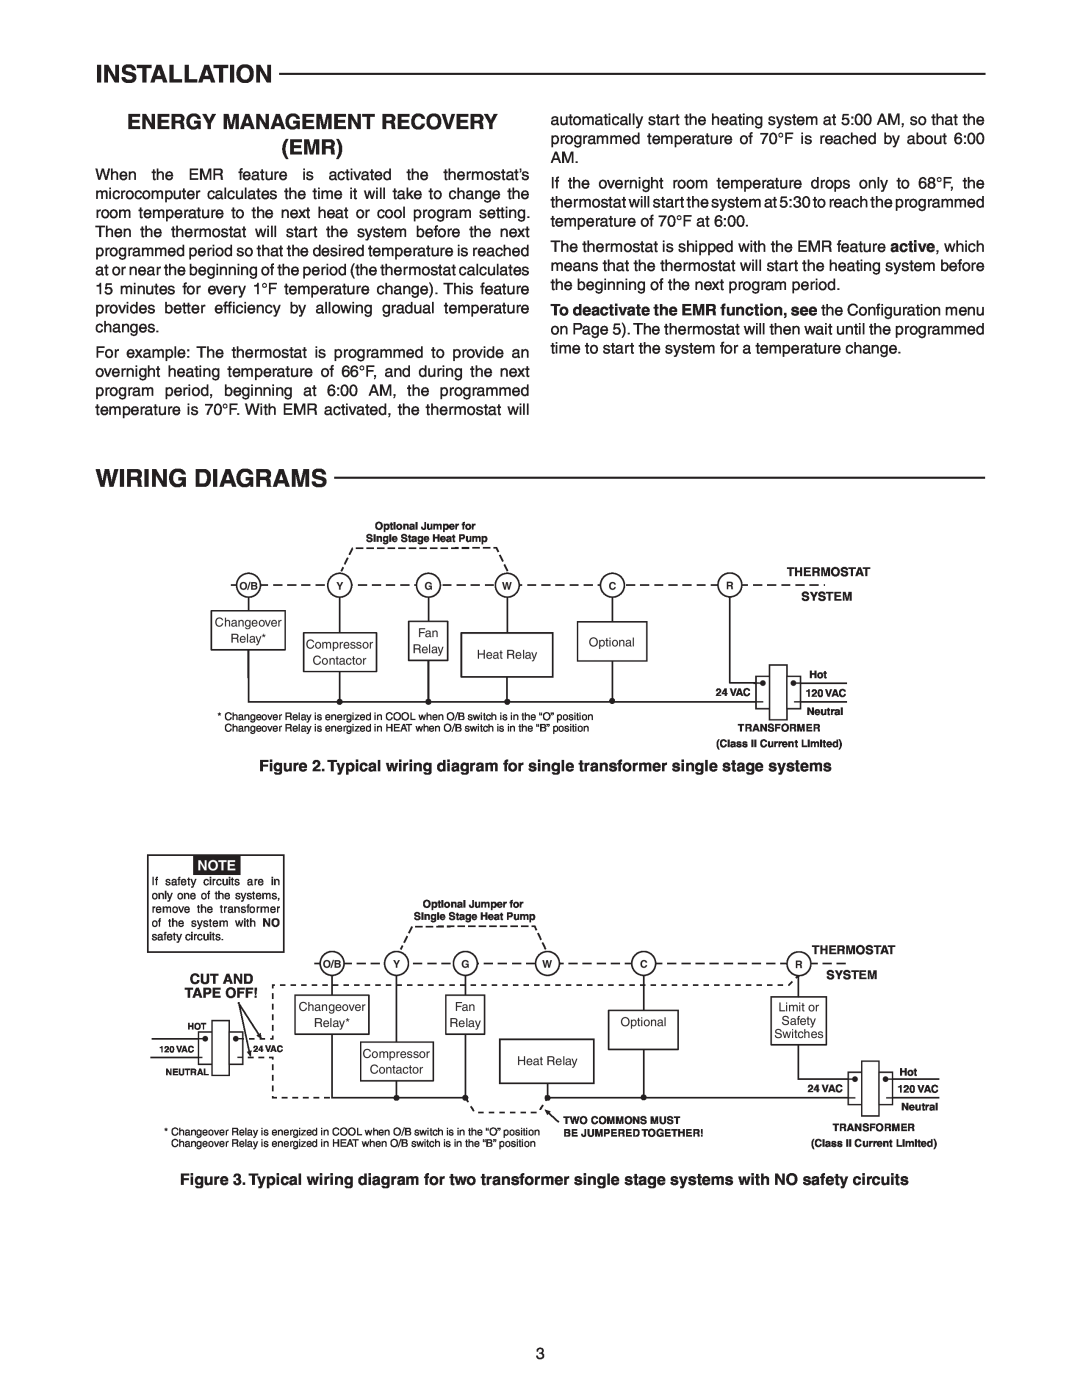 White Rodgers 1F87-0261 specifications Wiring Diagrams, Energy Management Recovery Emr, Installation 